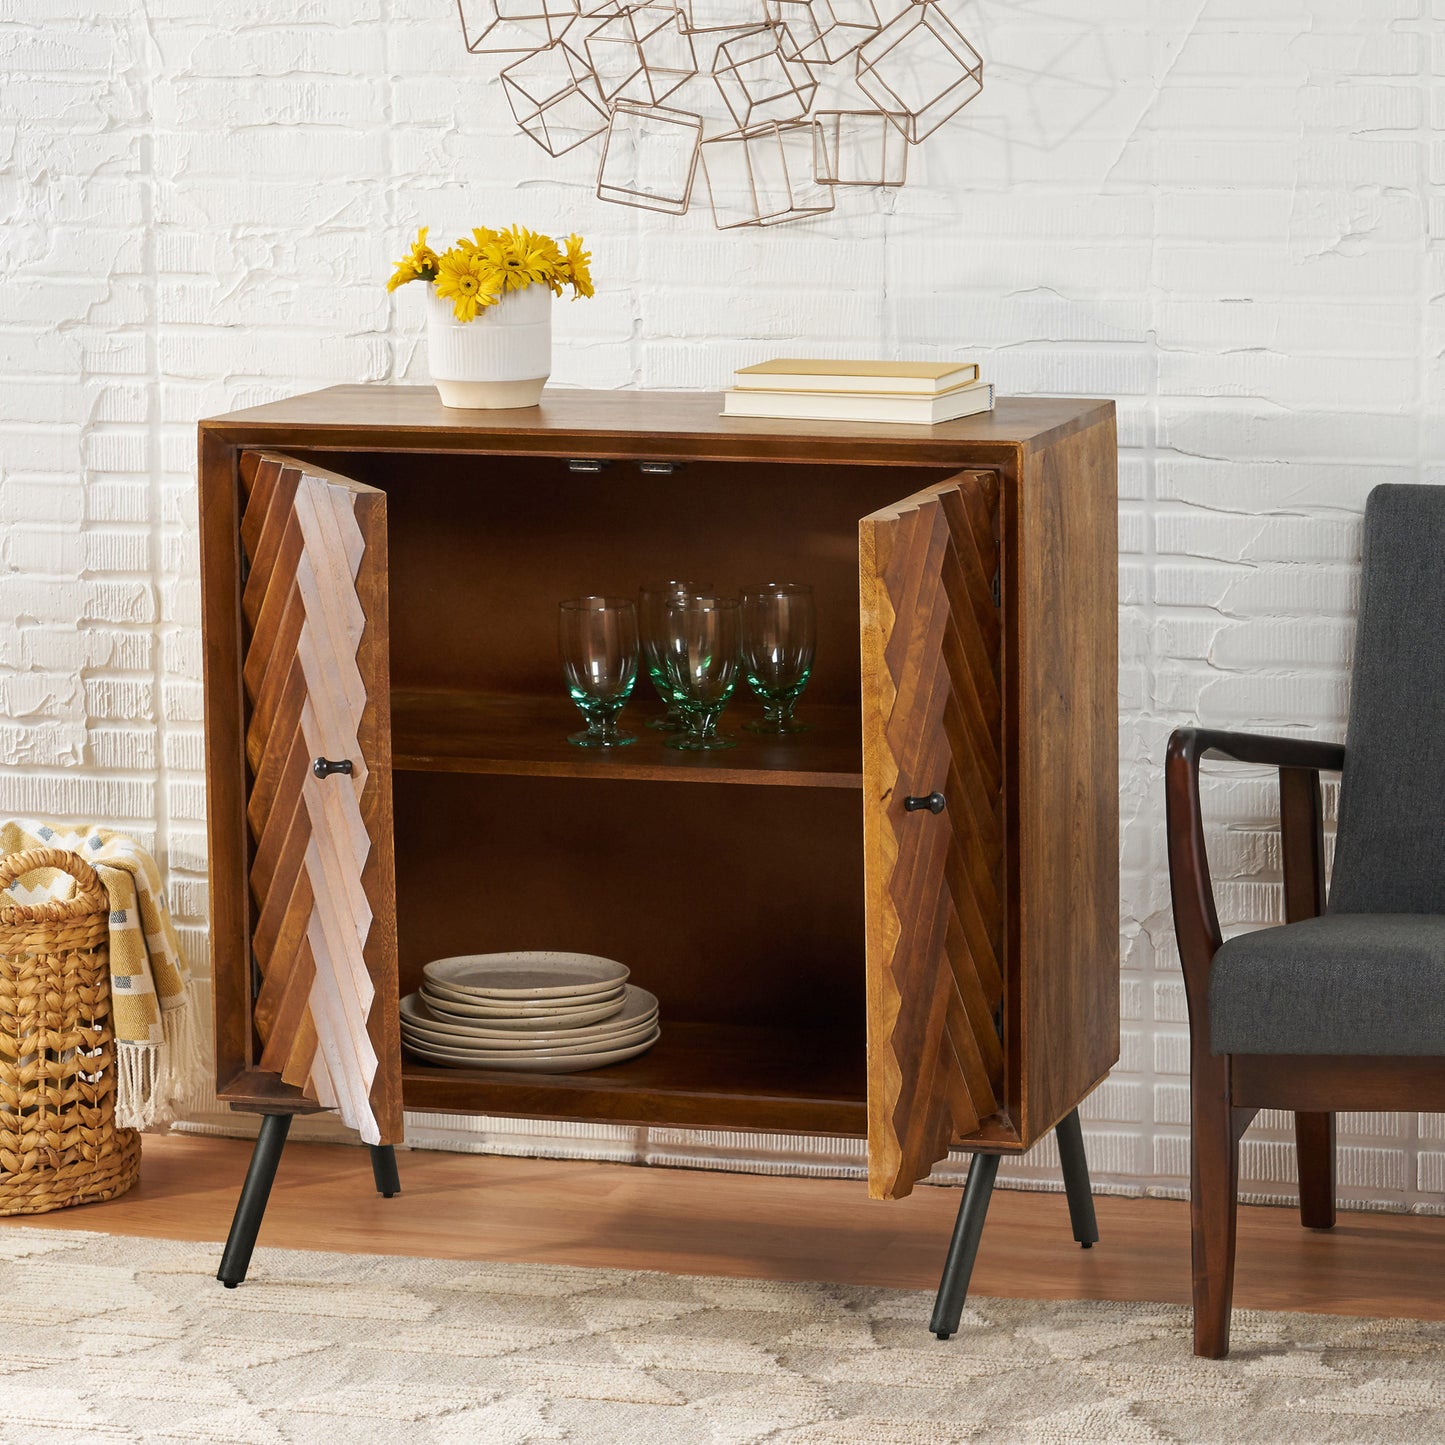 Wooden & Iron Sideboard